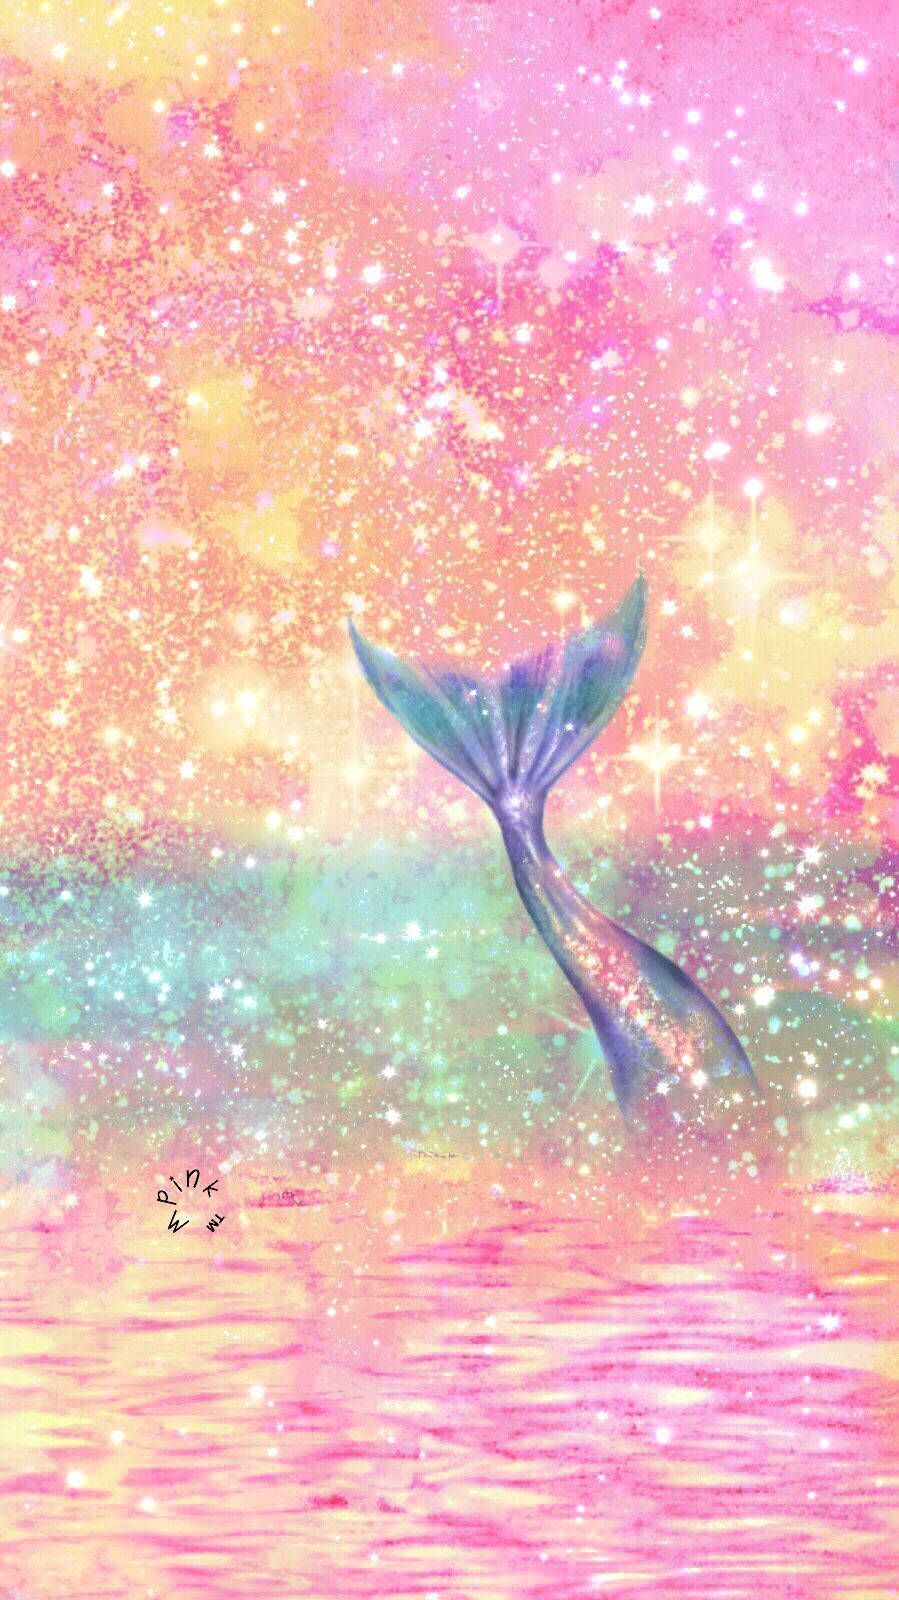 A whale in the water with stars and pink clouds - Mermaid